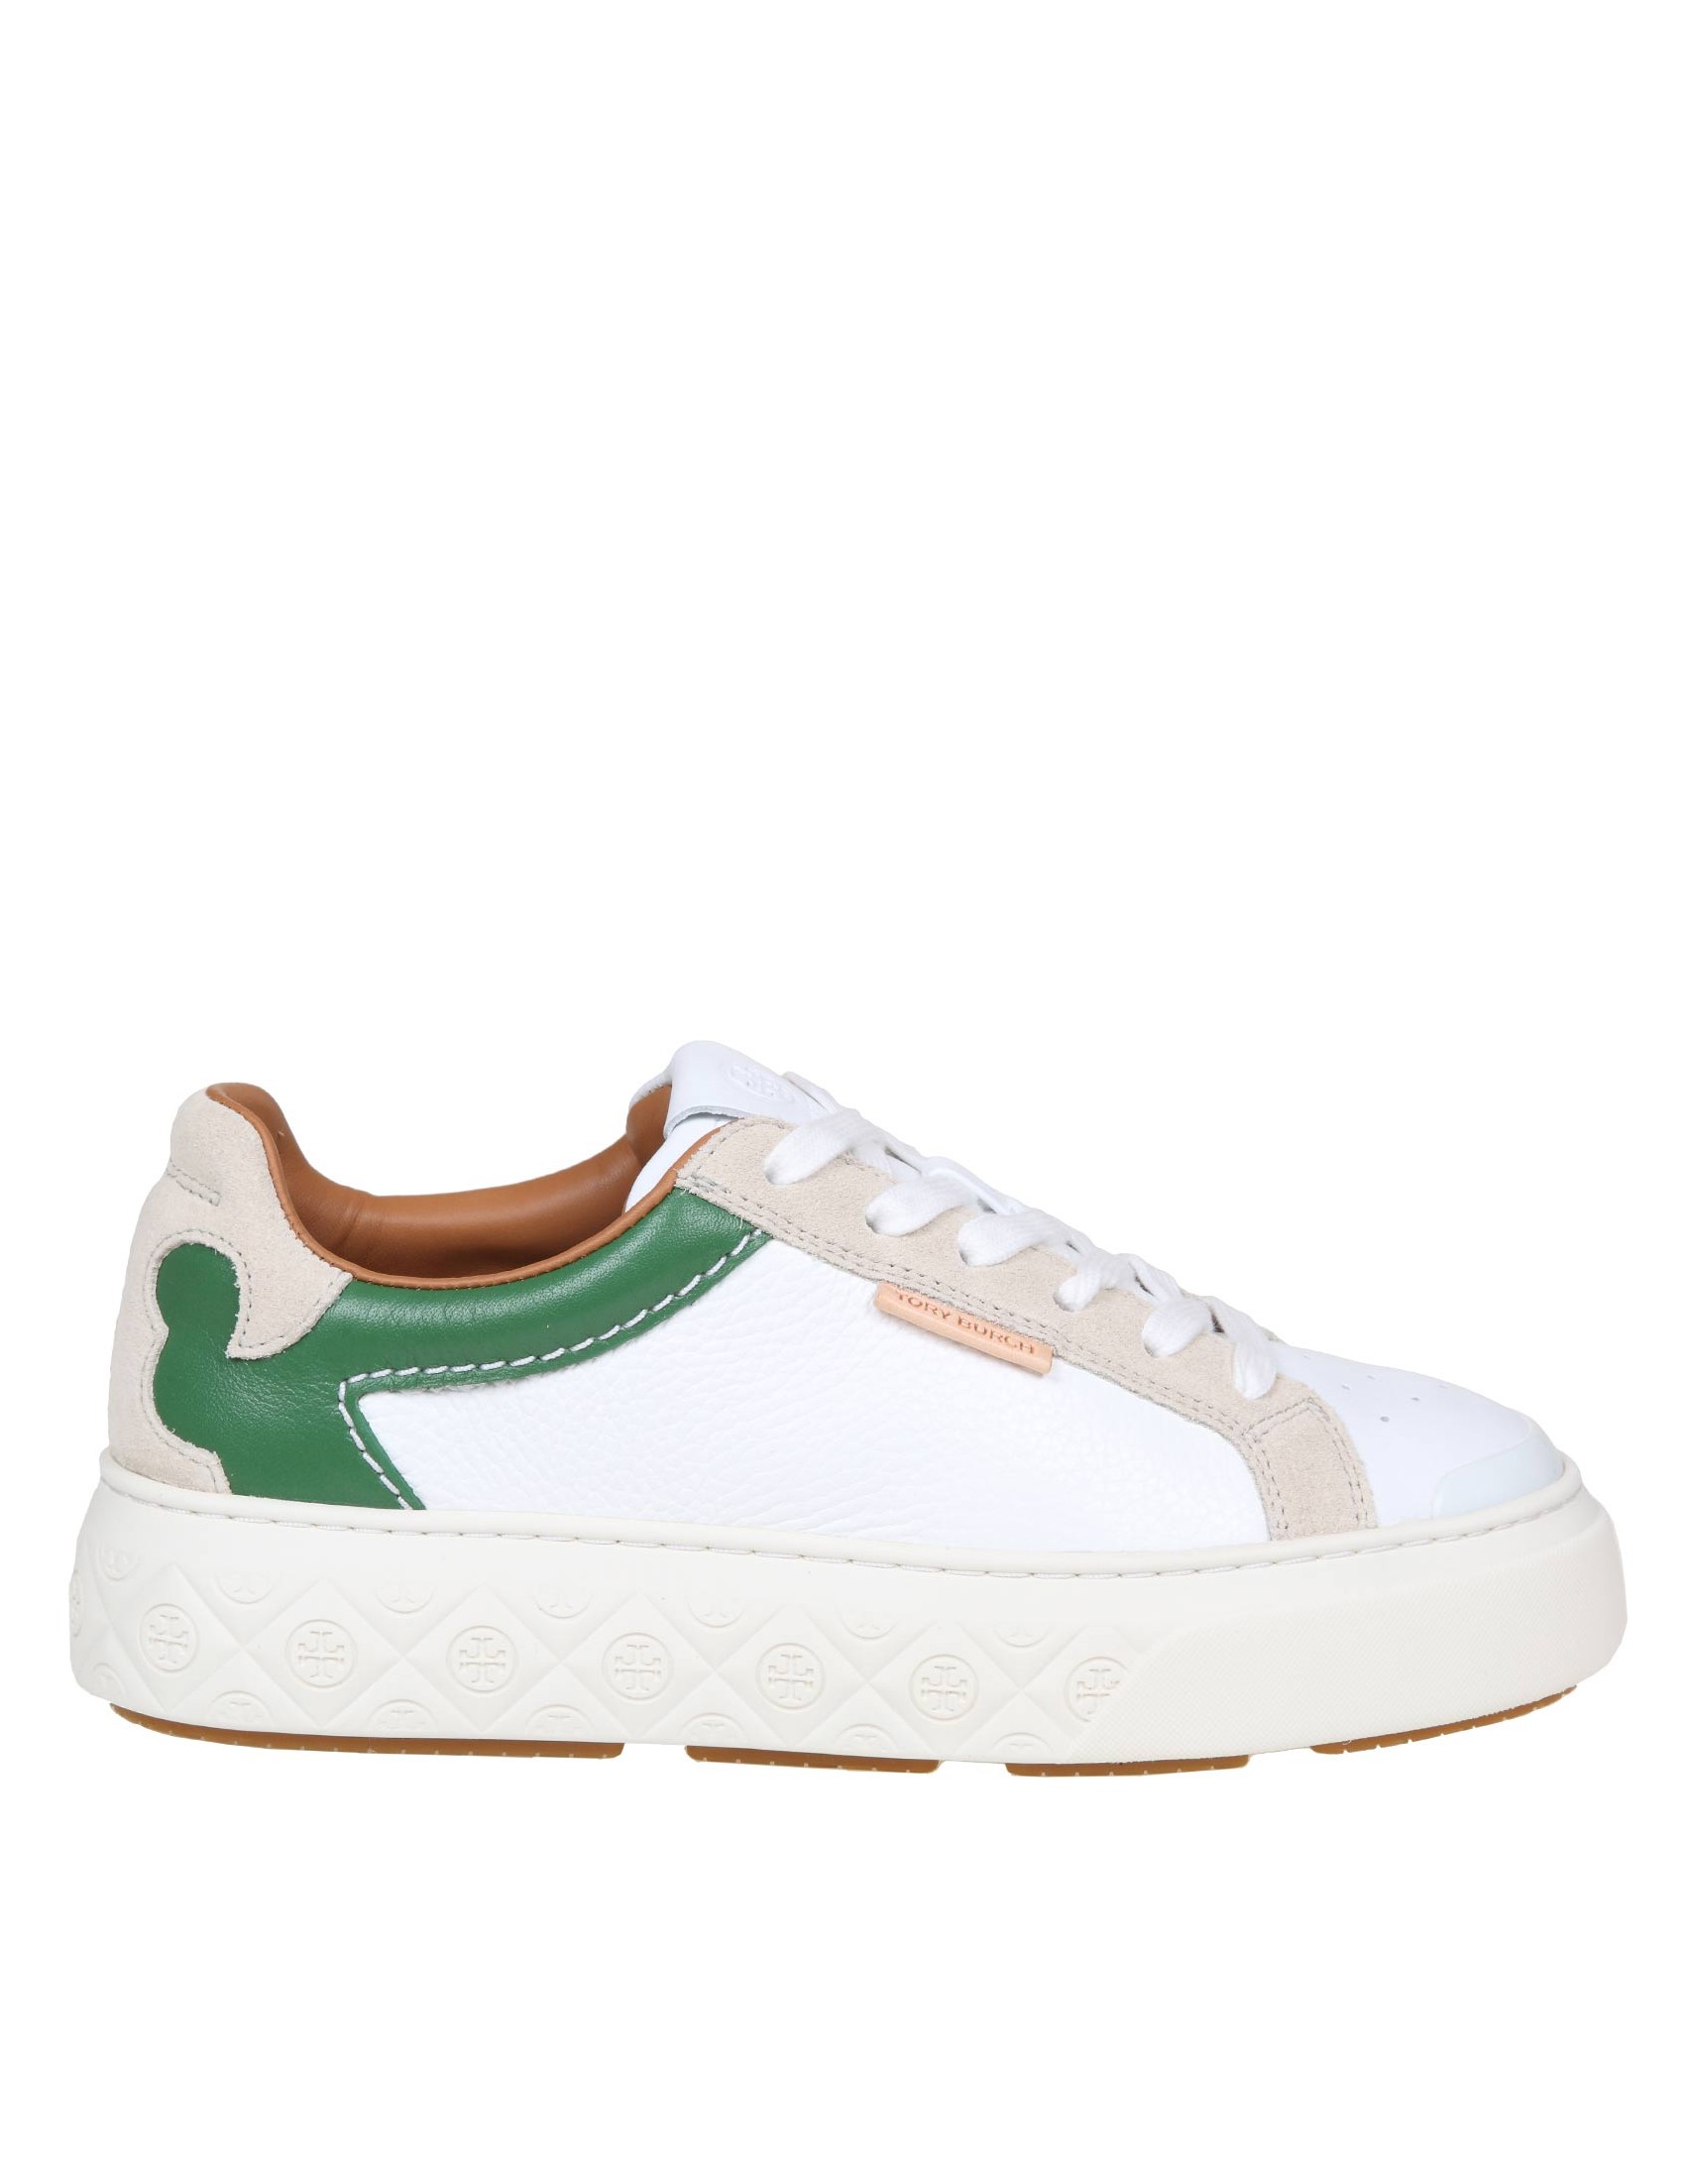 TORY BURCH SNEAKER LADYBUG IN WHITE AND GREEN LEATHER